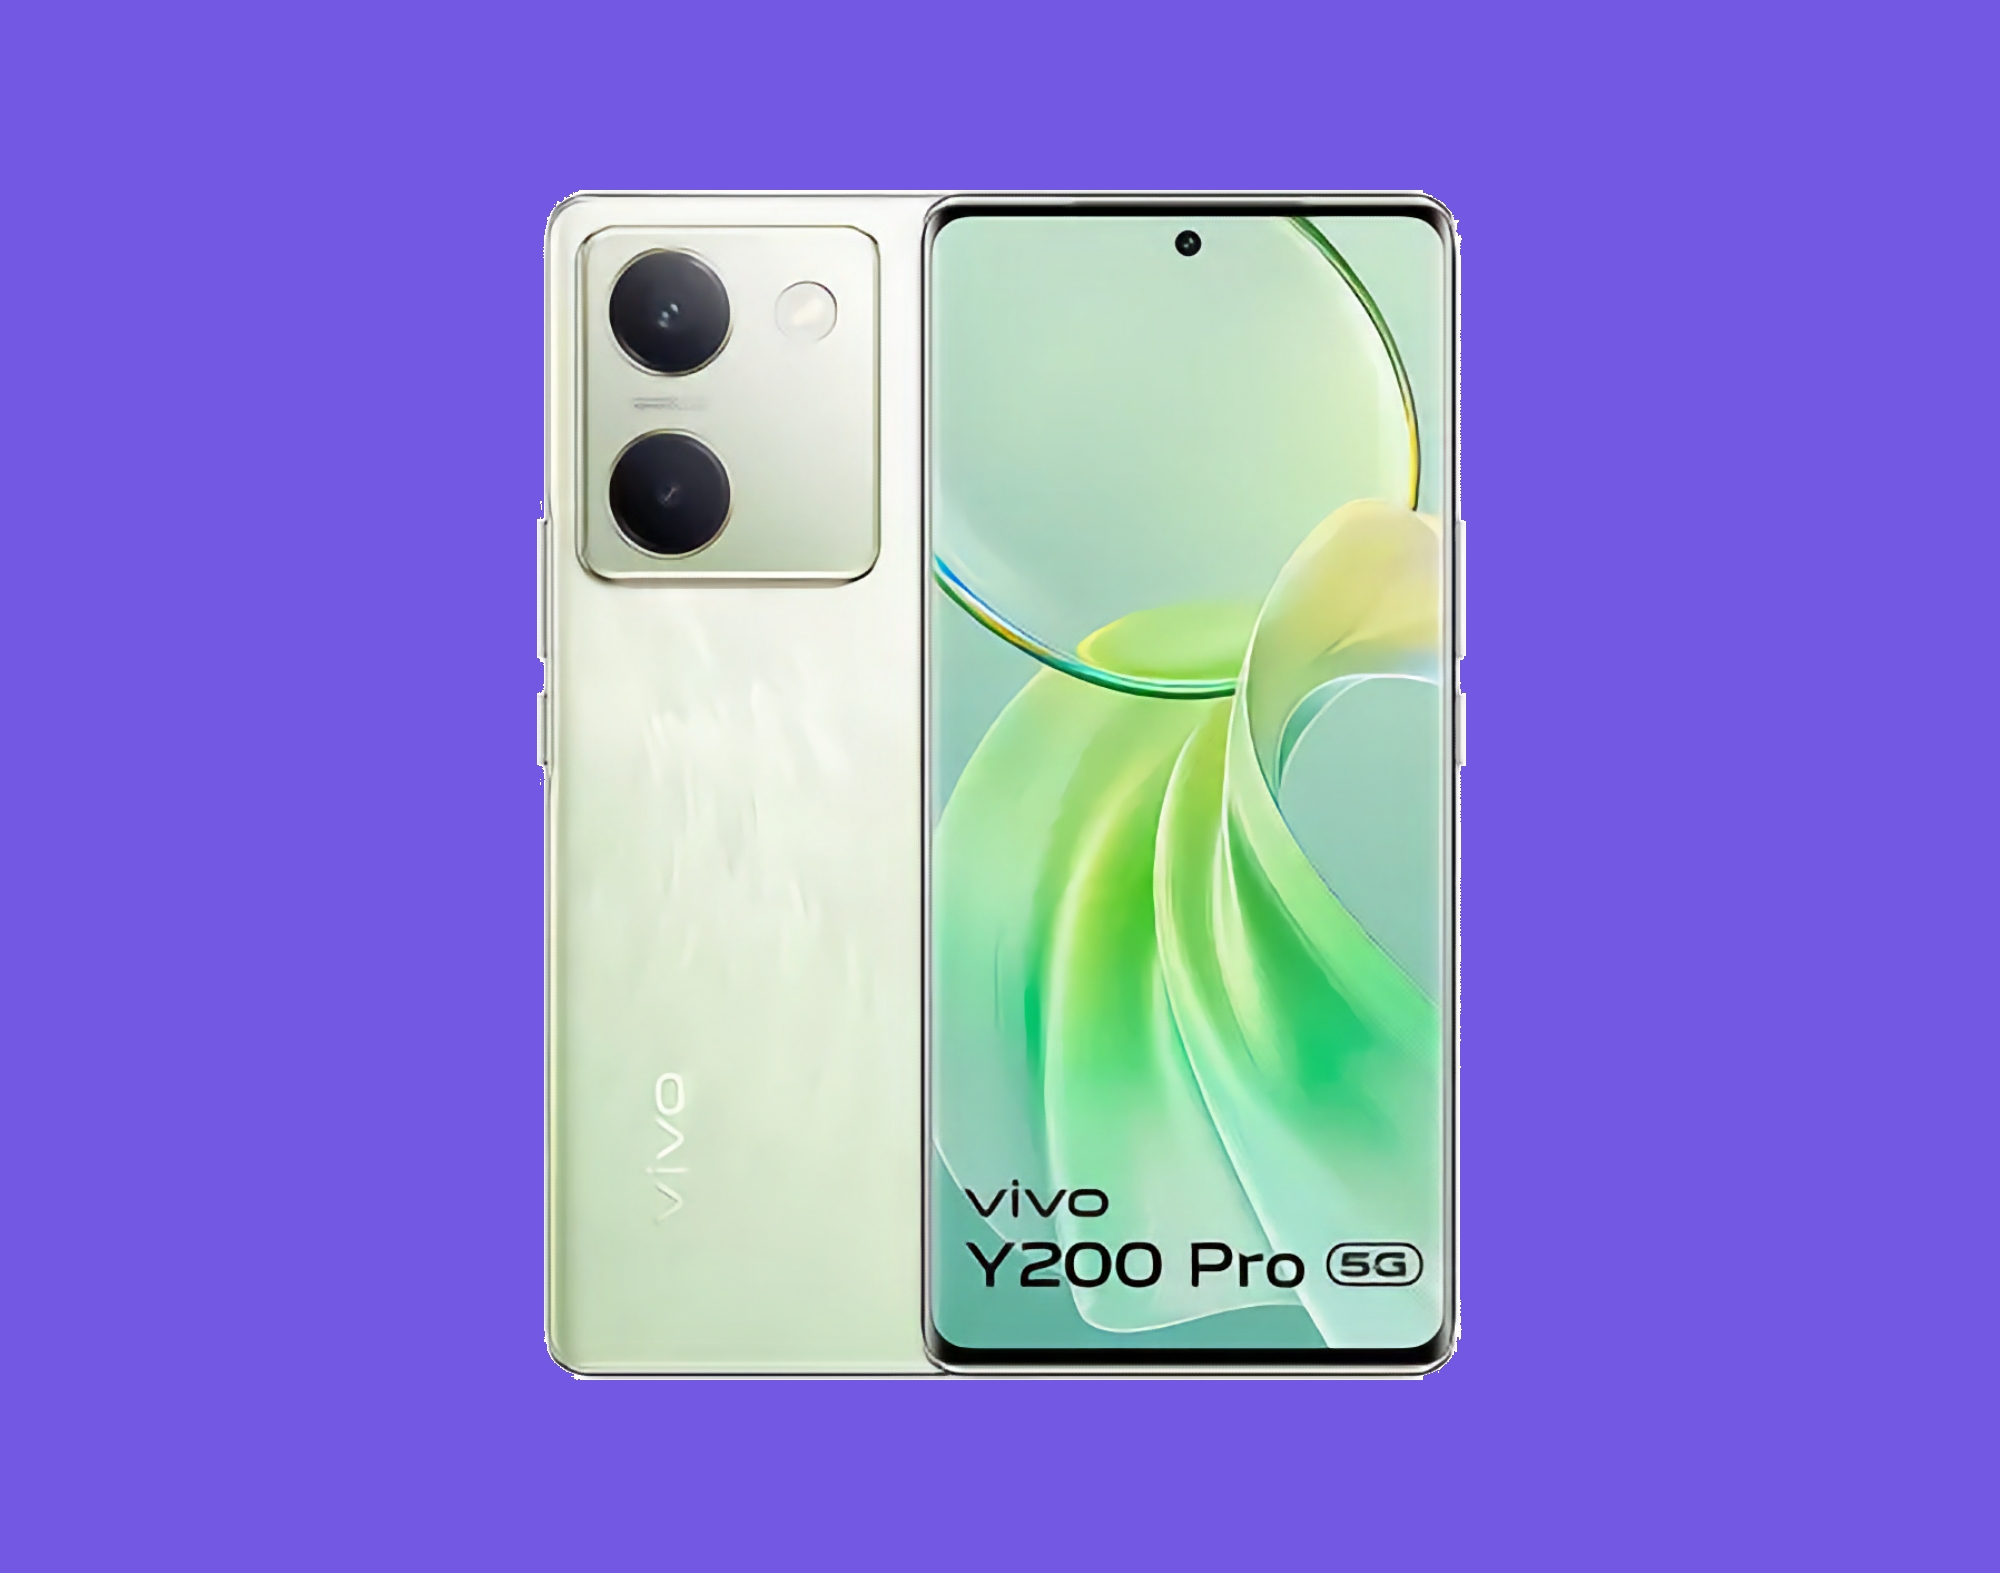 vivo Y200 Pro: 120Hz AMOLED display, Snapdragon 695 chip, 64 MP camera and 5000 mAh battery with 44W charging for $300